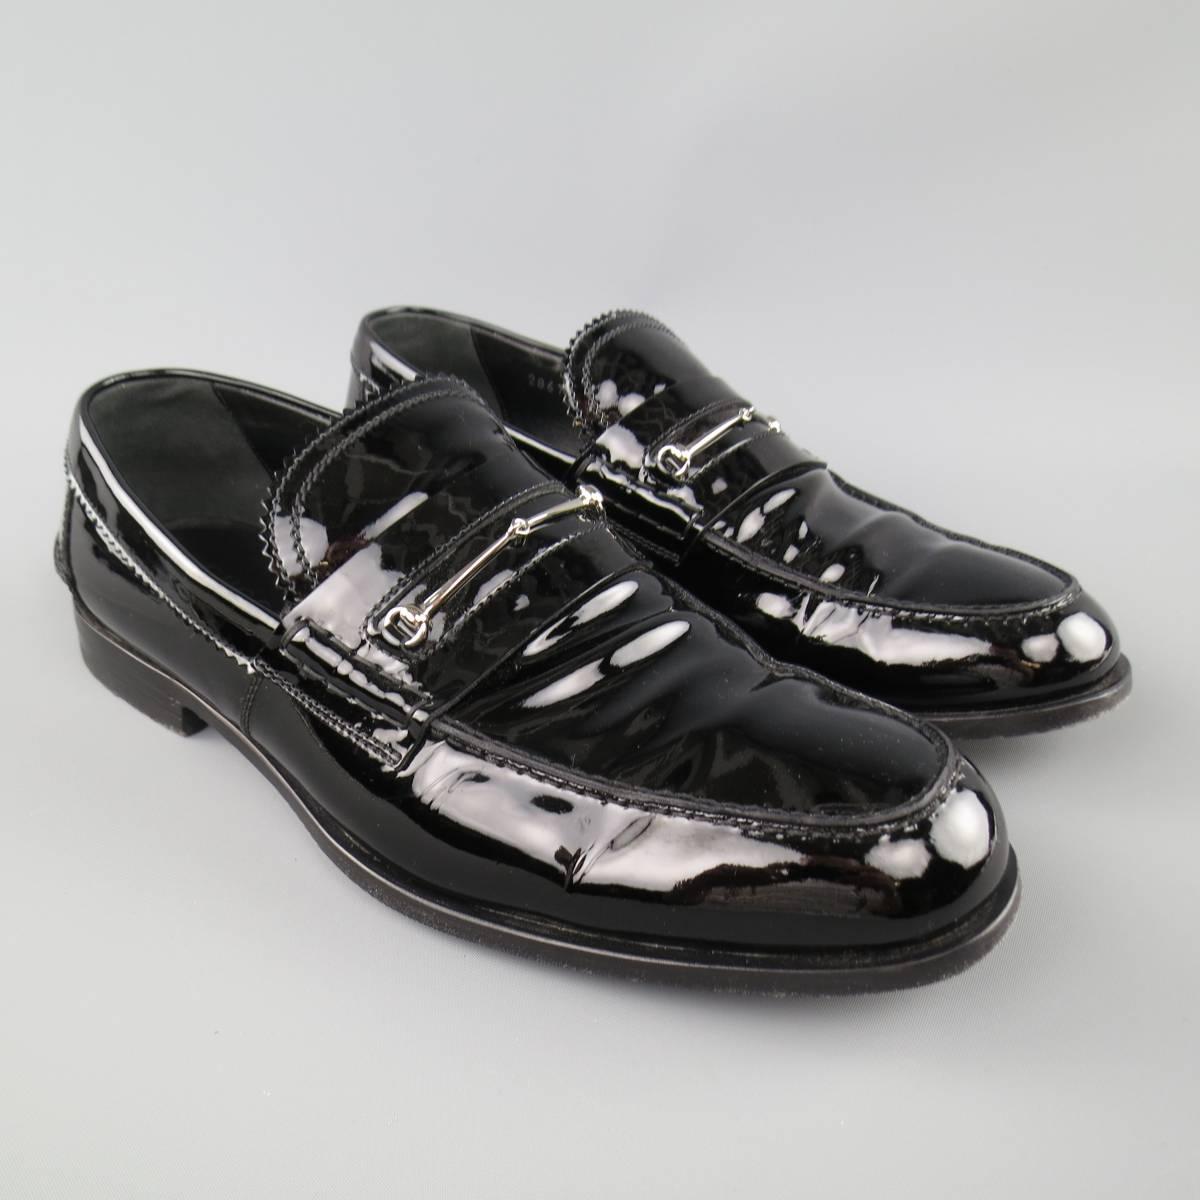 GUCCI Loafers consists of patent leather material in a black color tone. Designed in a round toe, moc stitching with silver horse bit. Tone-on-tone stitching. Leather lining and sole. Comes with original box and cloth bag. Made in Italy.
 
Good